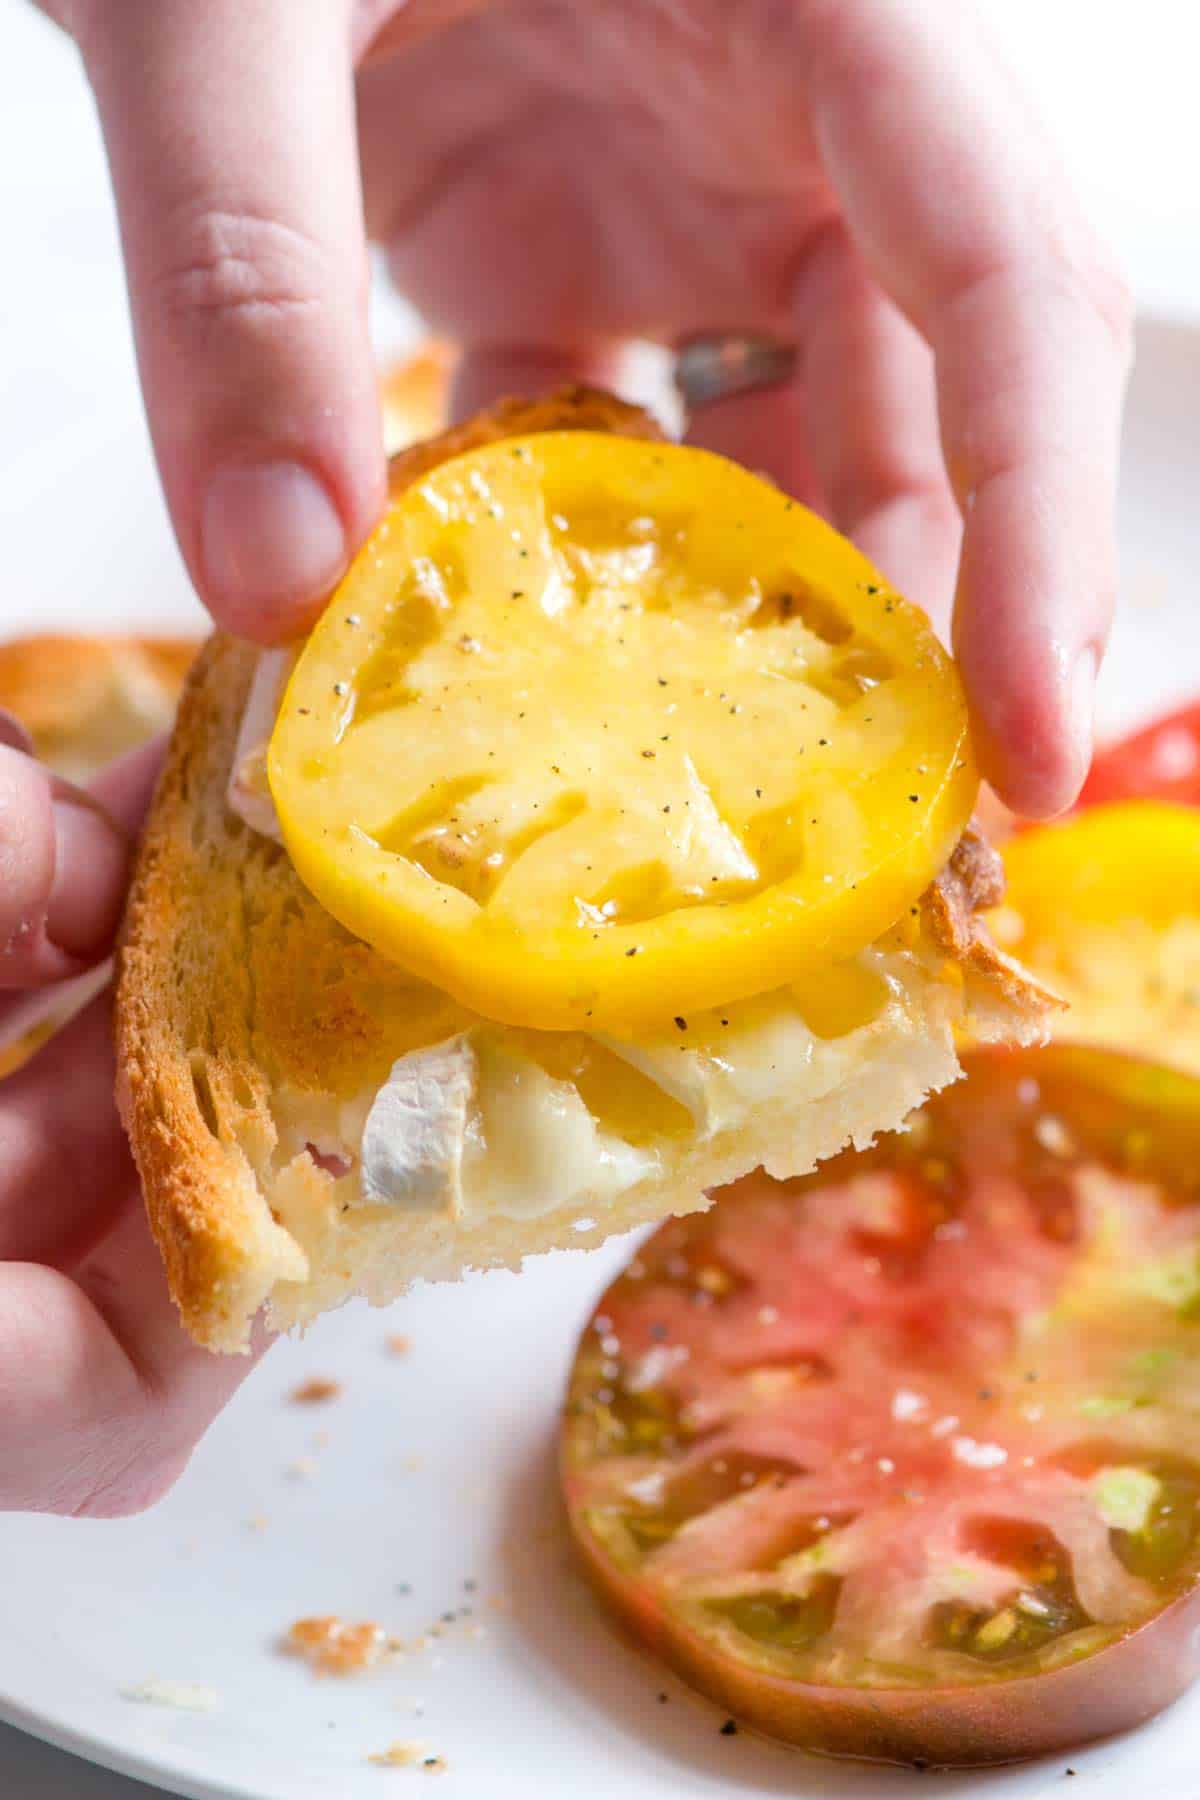 How to Make Open-Faced Sandwiches with Tomatoes and Melted Brie